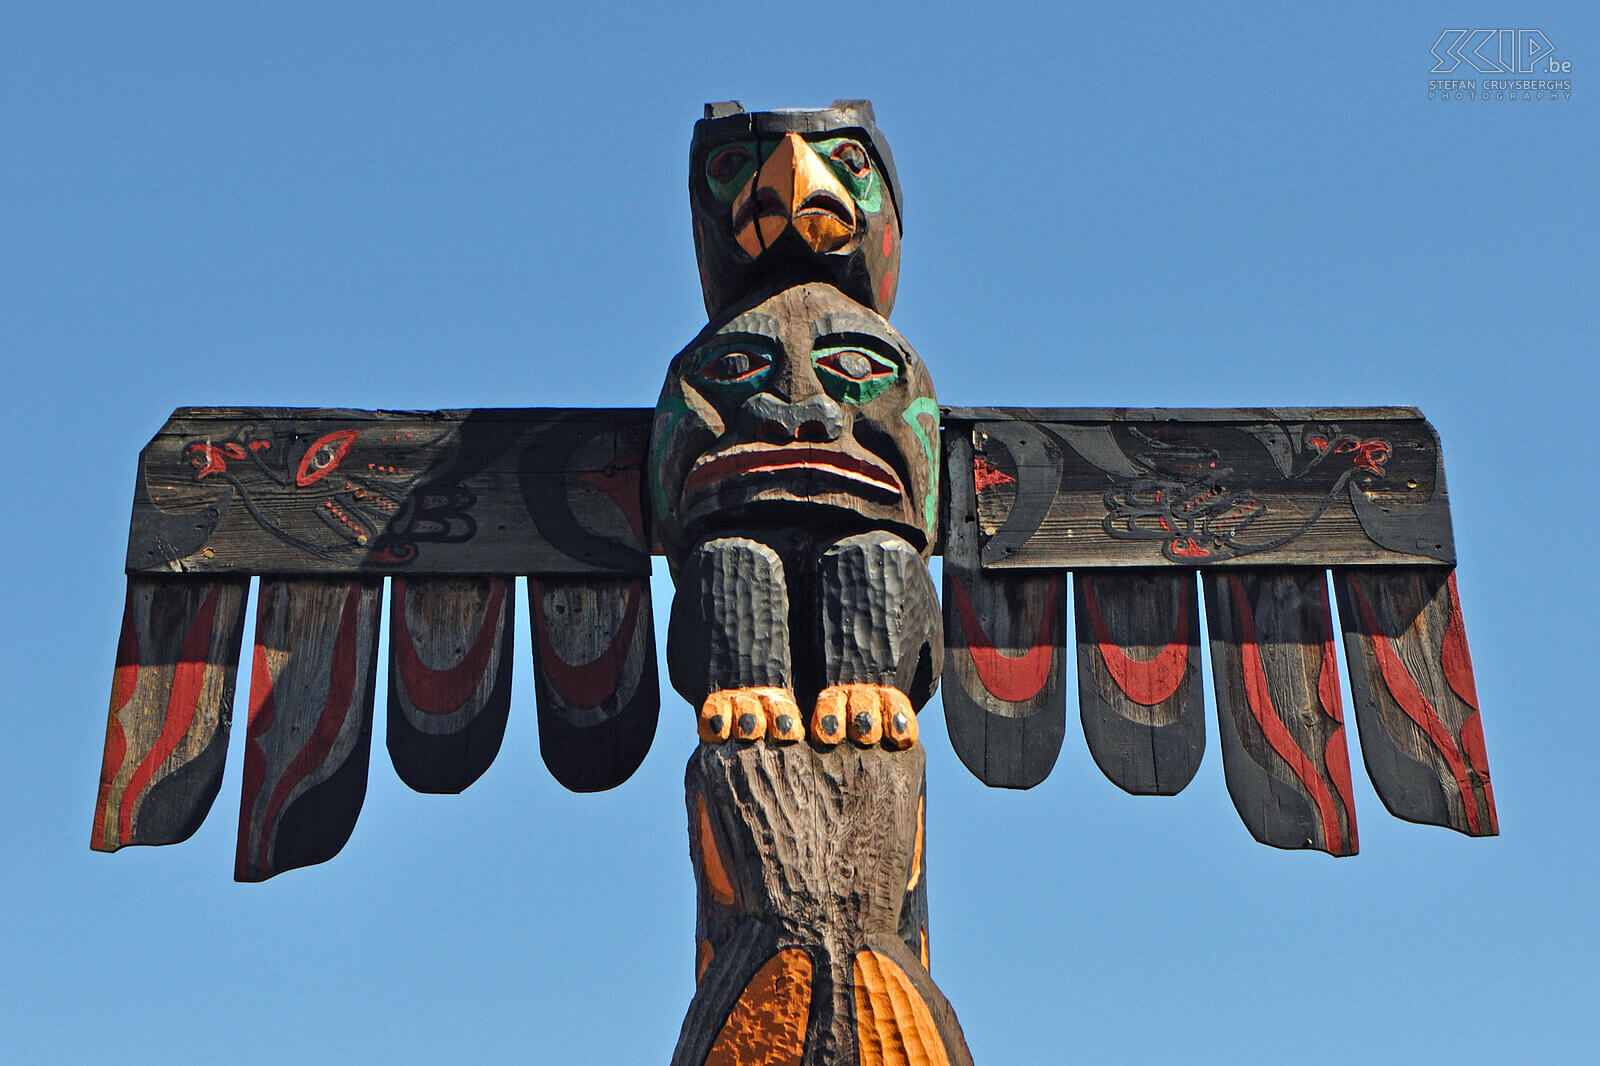 Duncan - Totempole The small town of Duncan has 80 totem poles. Stefan Cruysberghs